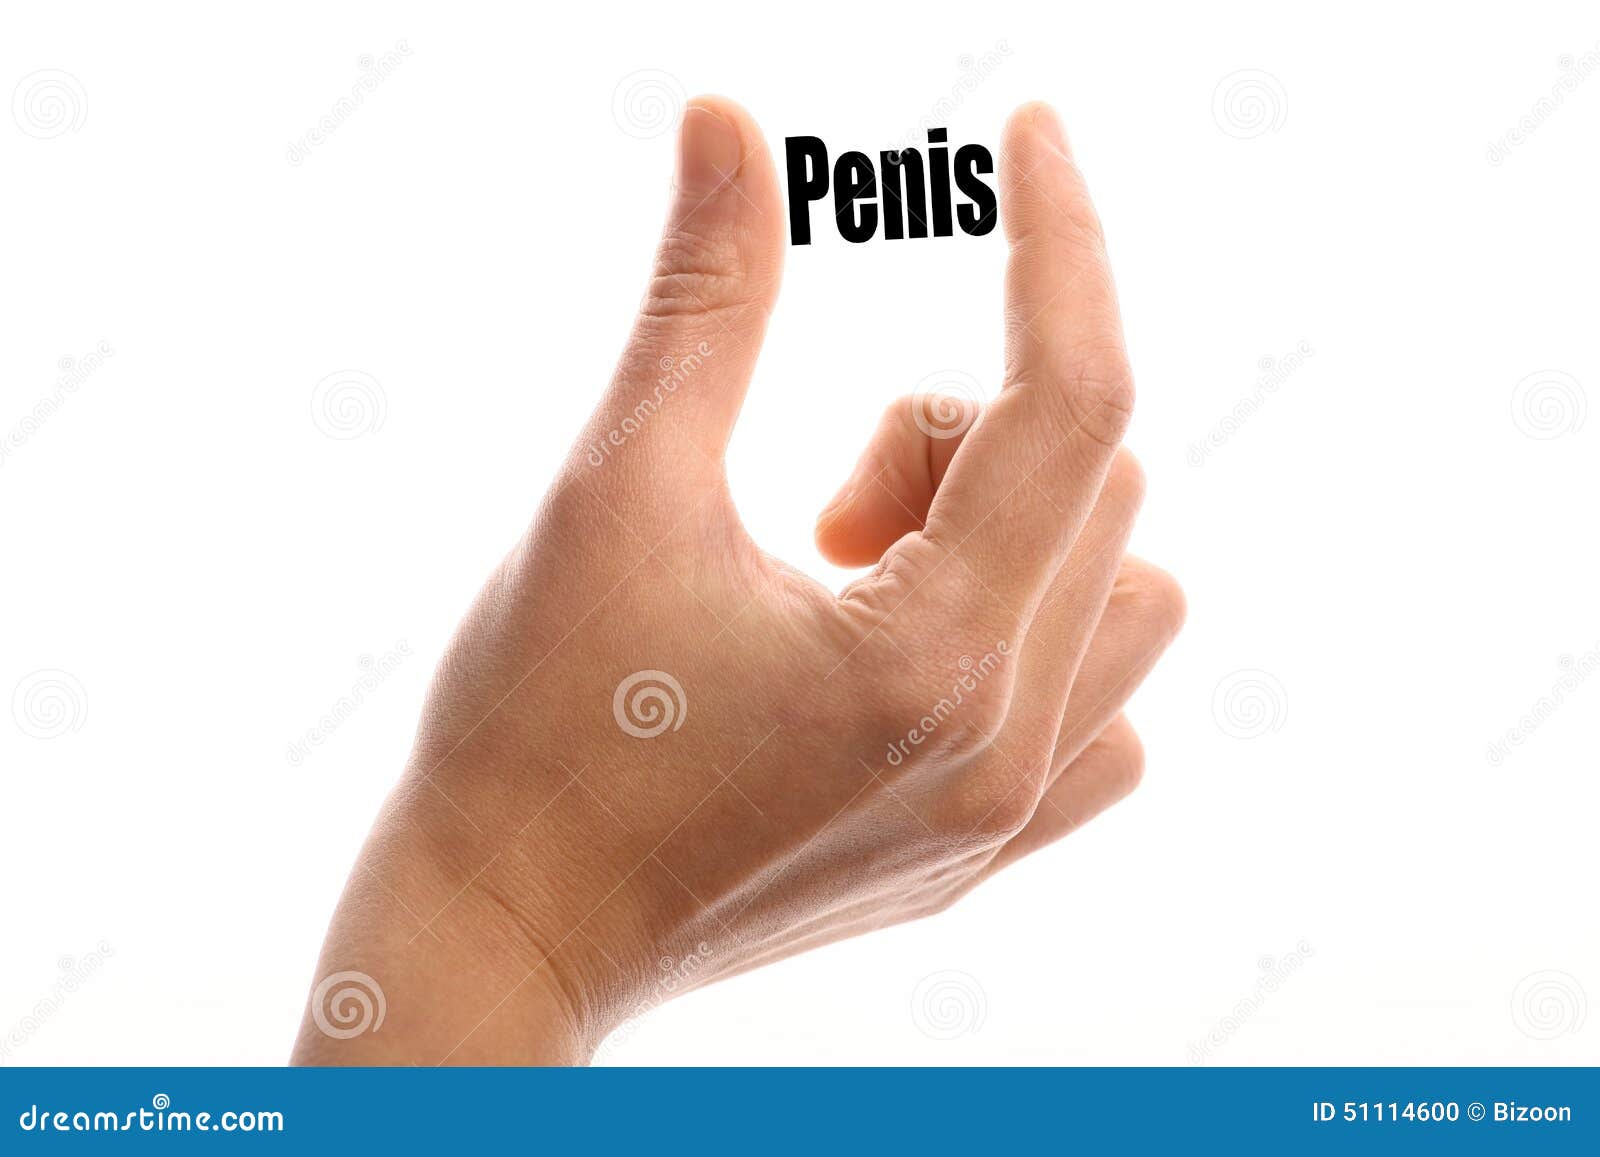 Small Hands Small Penis 39